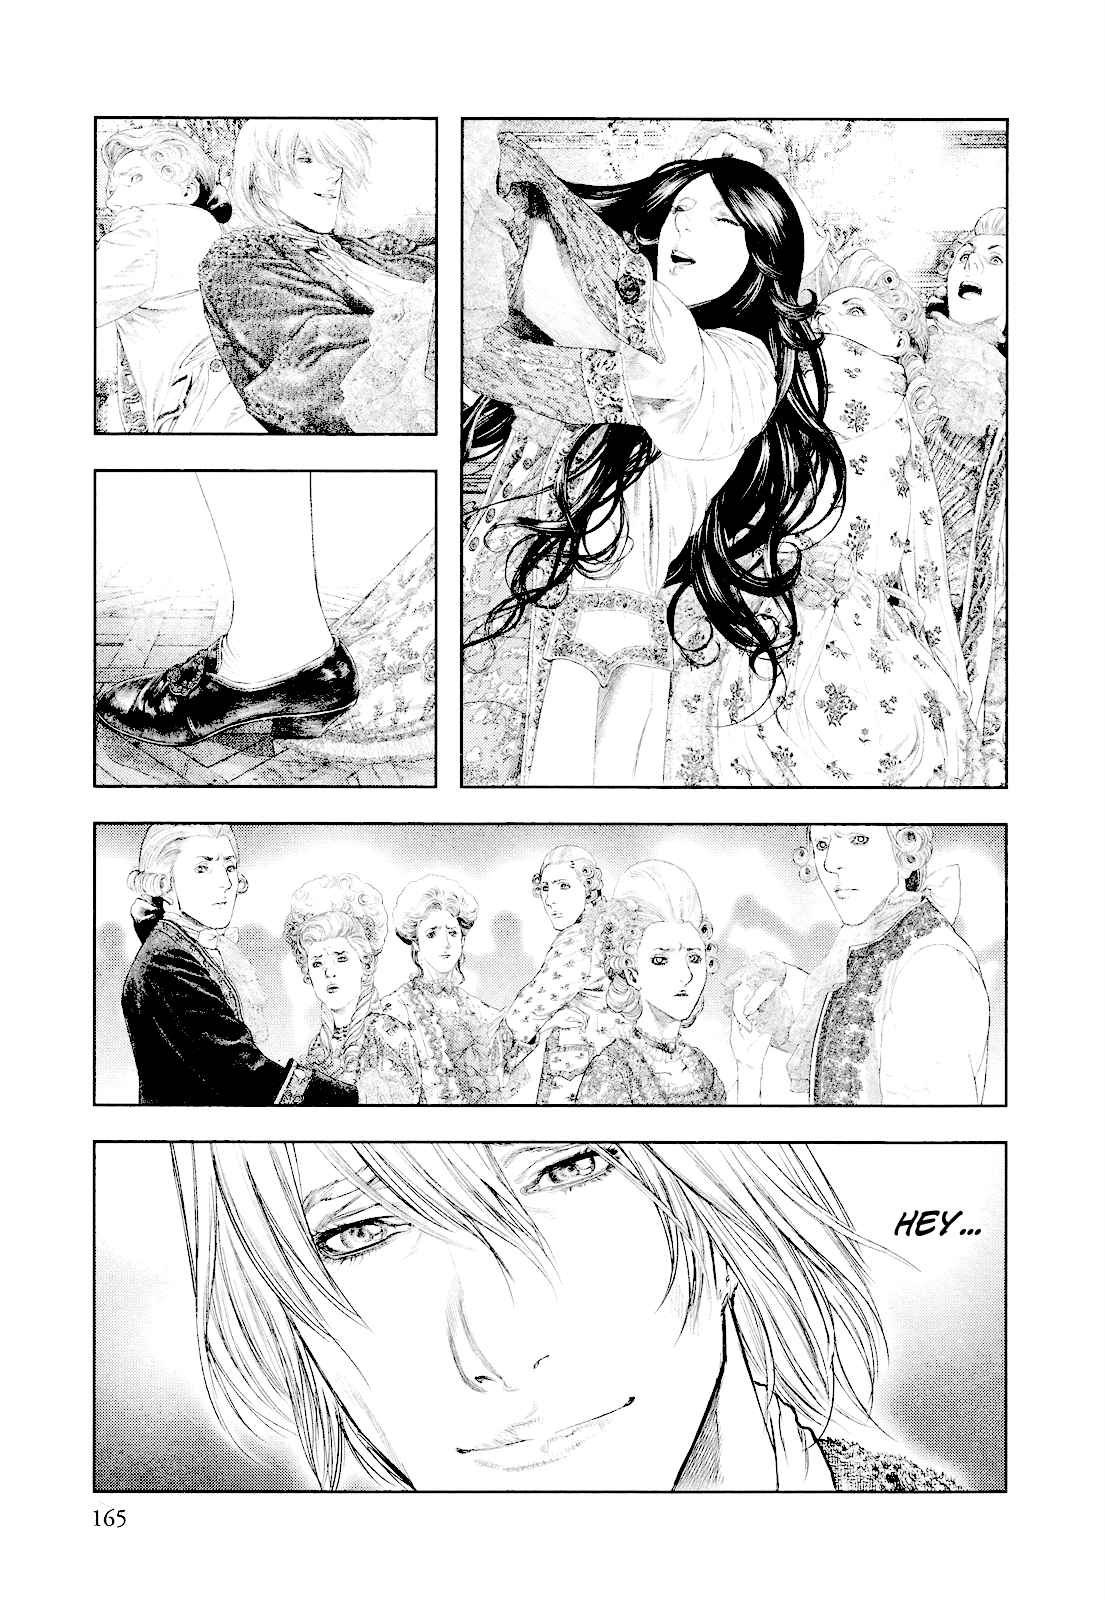 Innocent Vol. 3 Ch. 29 Steps of Purity